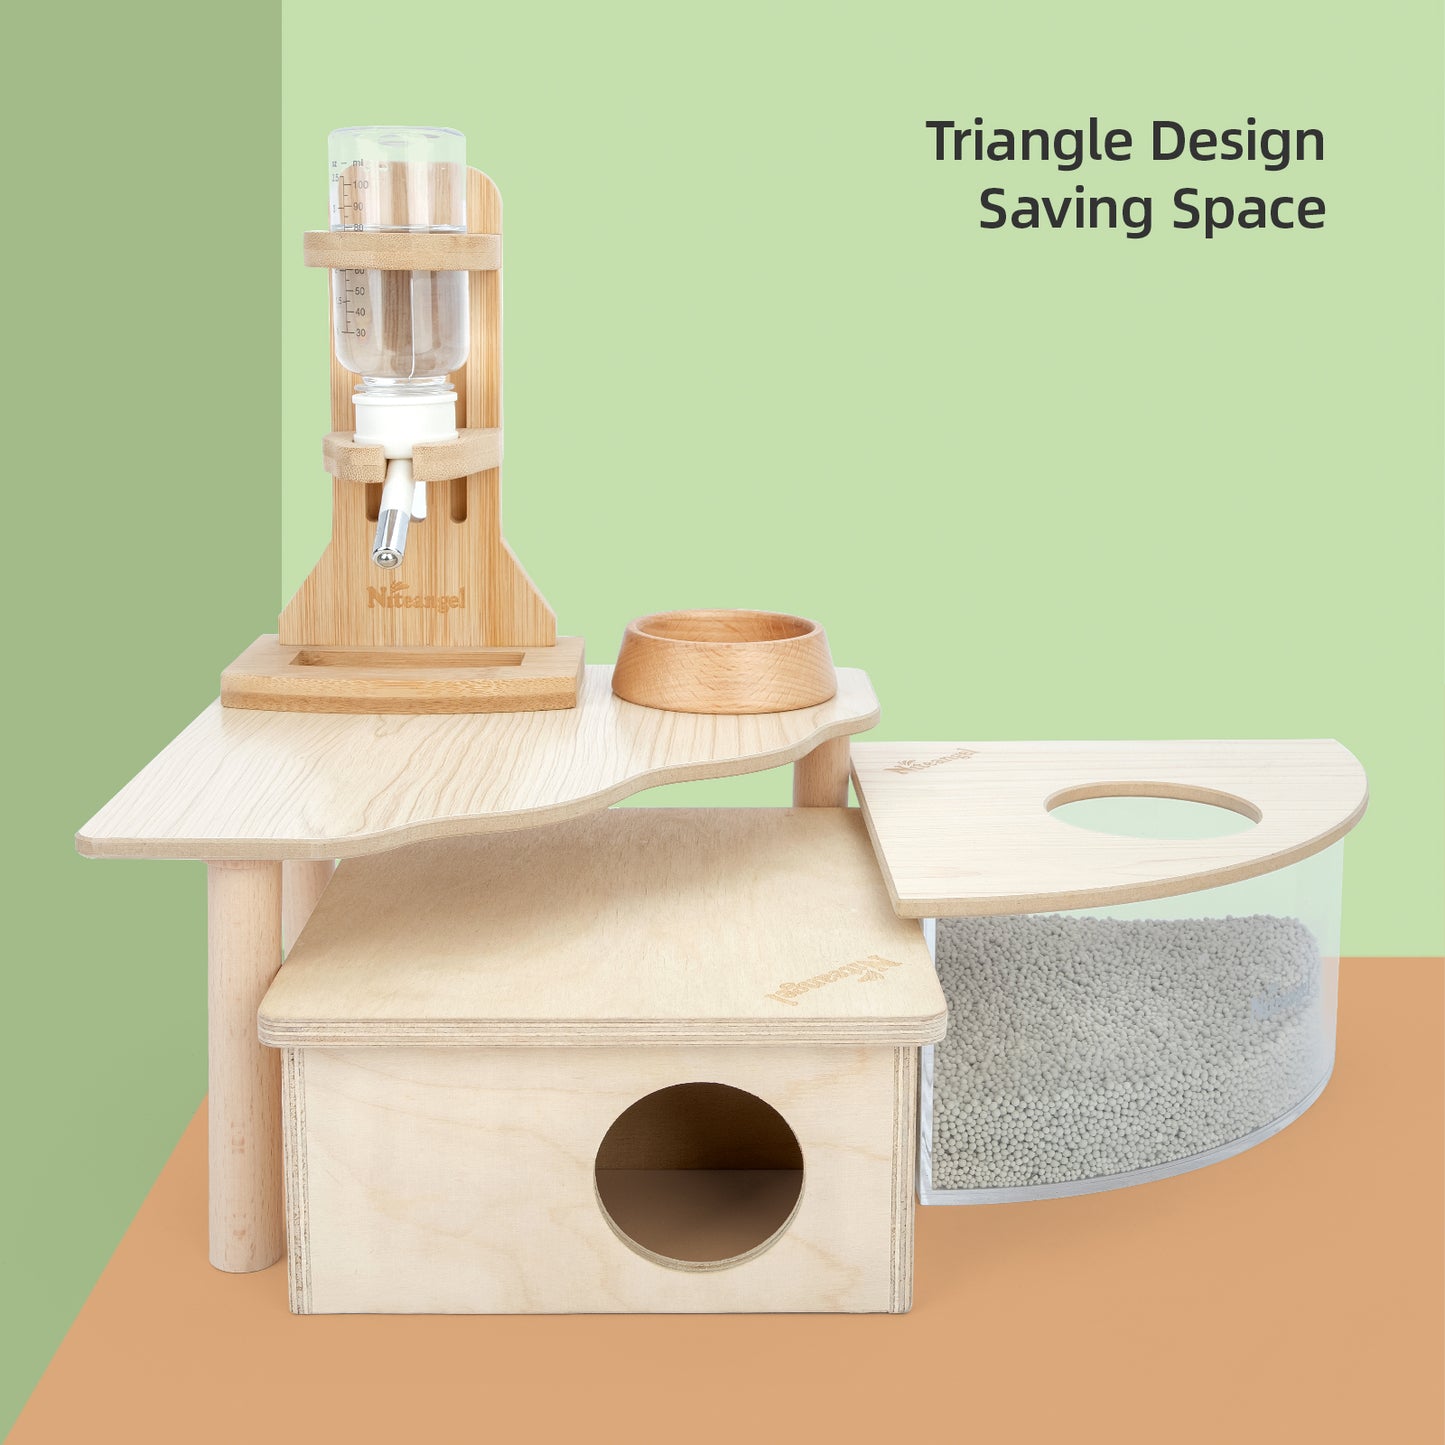 Niteangel Hamster Play Wooden Platform for Dwarf Syrian Hamsters or Other Small Pets (Triangle)